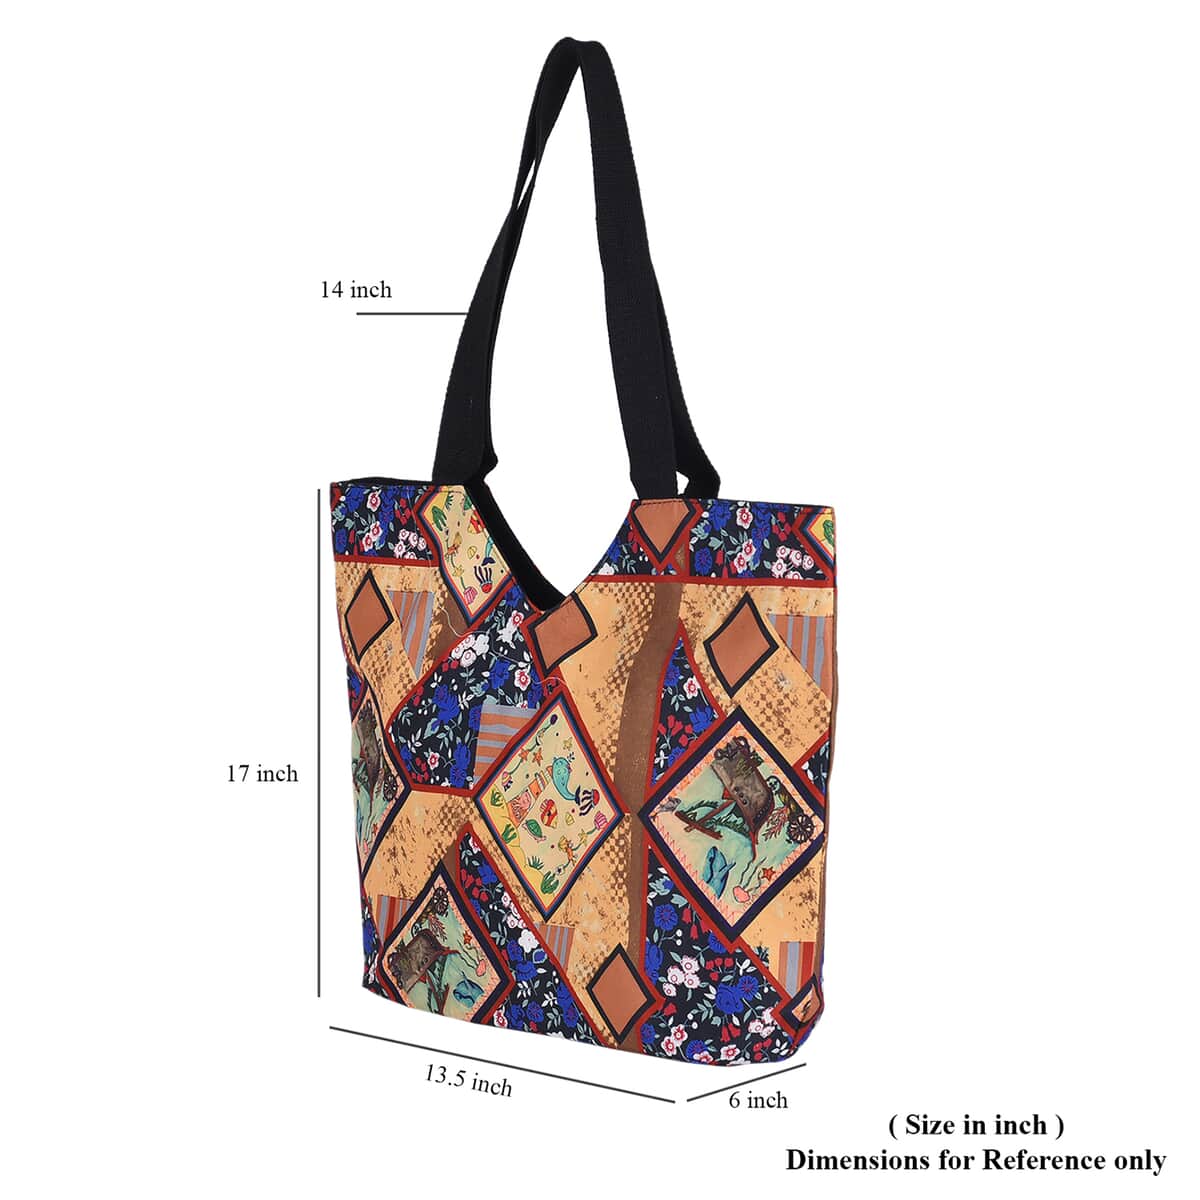 Yellow Patchwork Printed Pattern Tote Bag (17.5"x6"x13.5") with Handle Drop image number 6